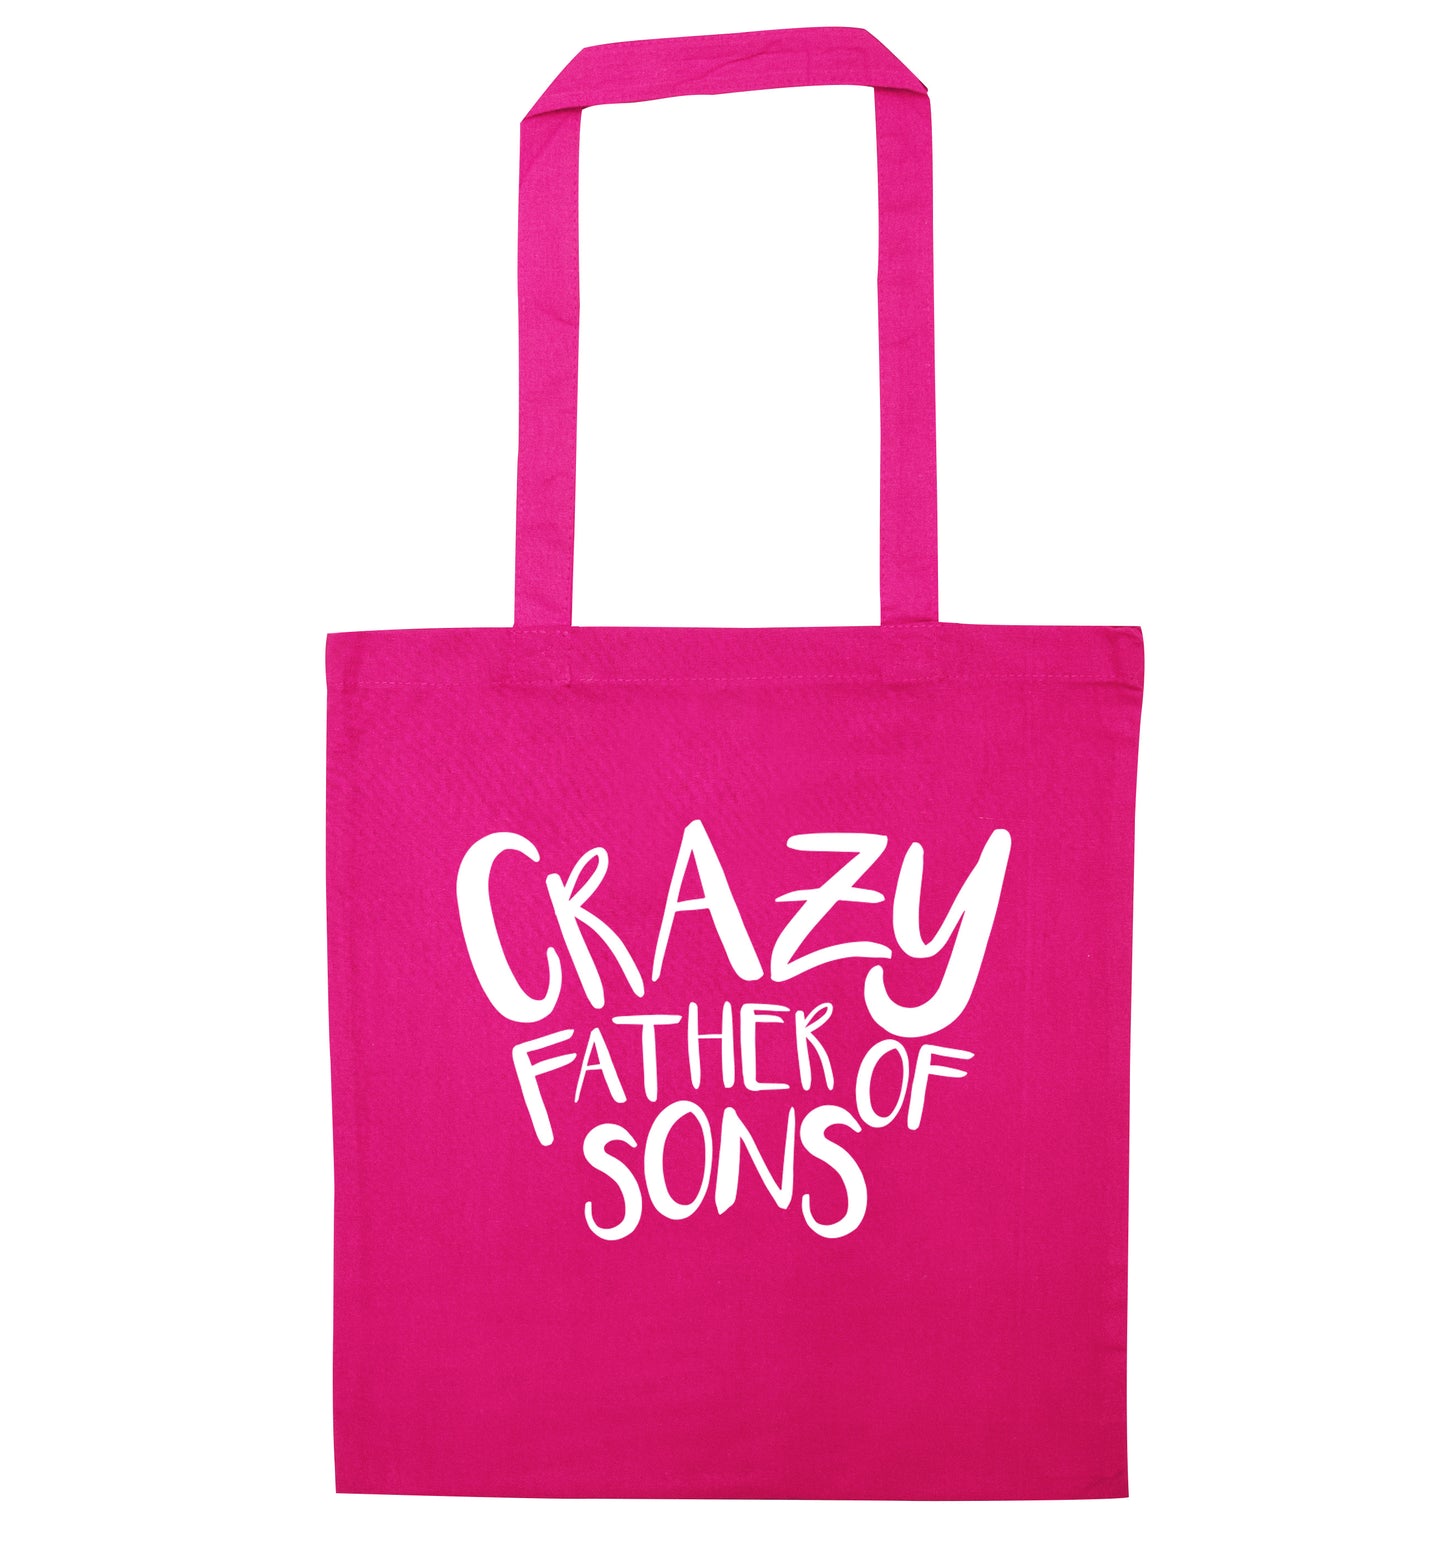 Crazy father of sons pink tote bag